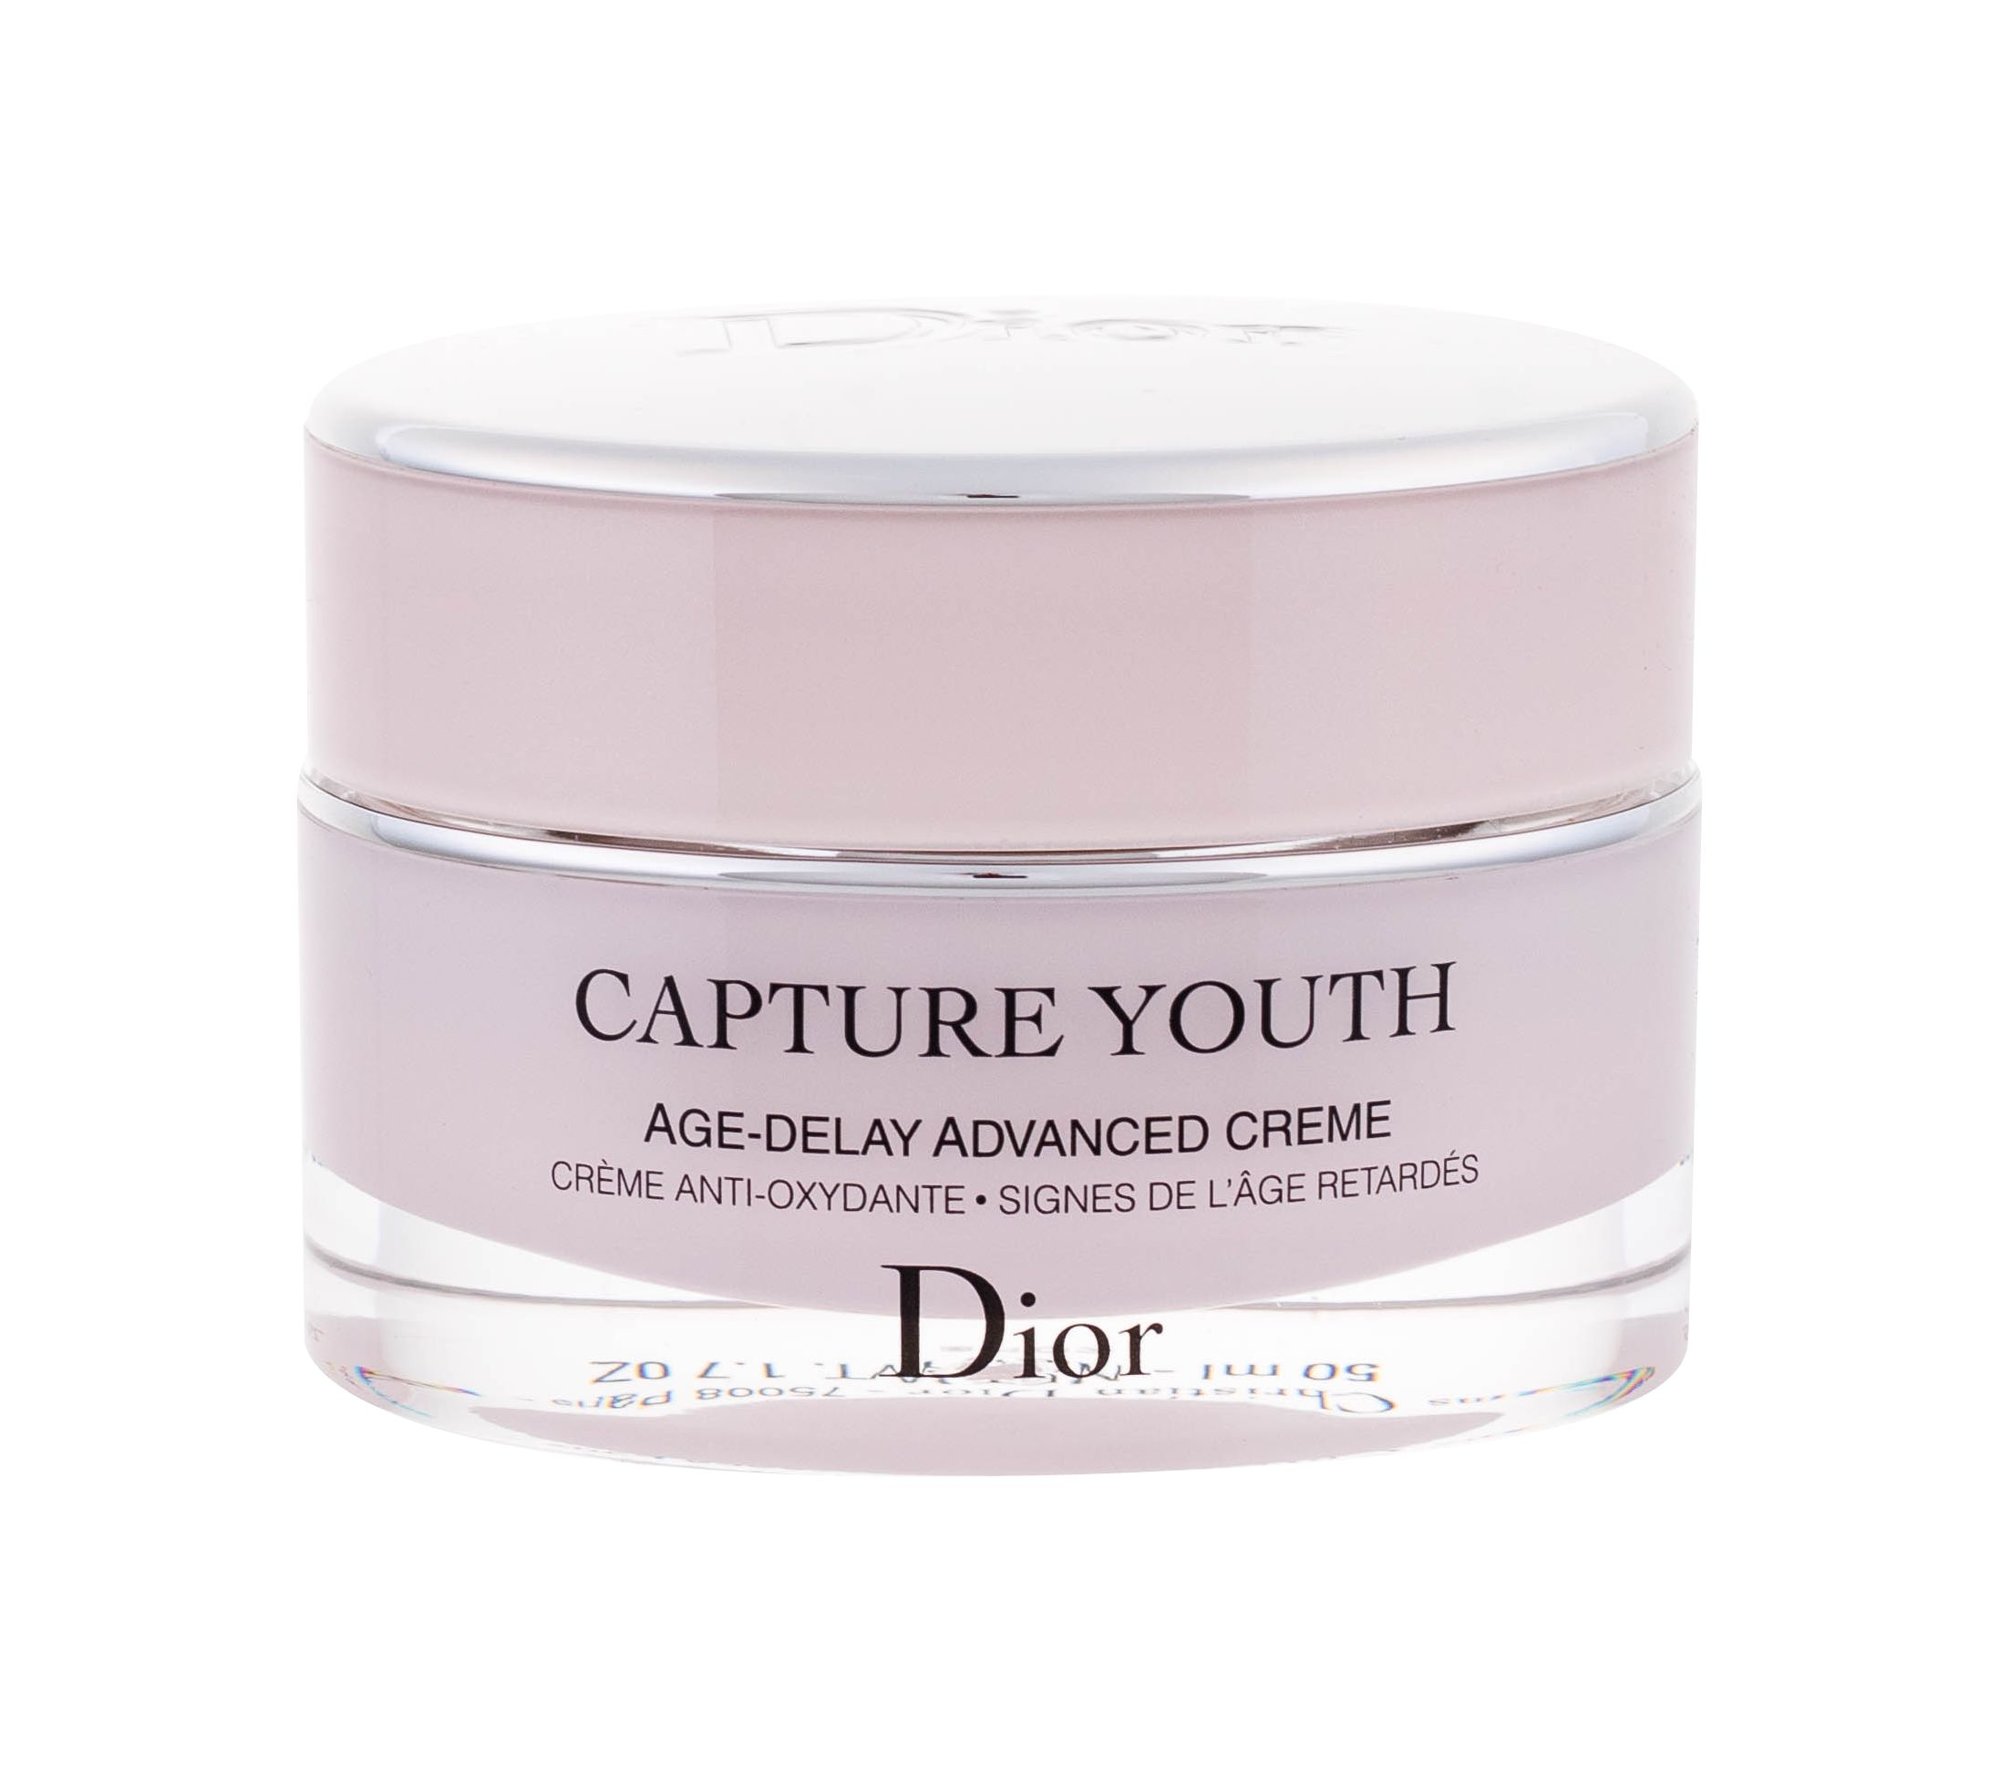 Christian Dior Capture Youth